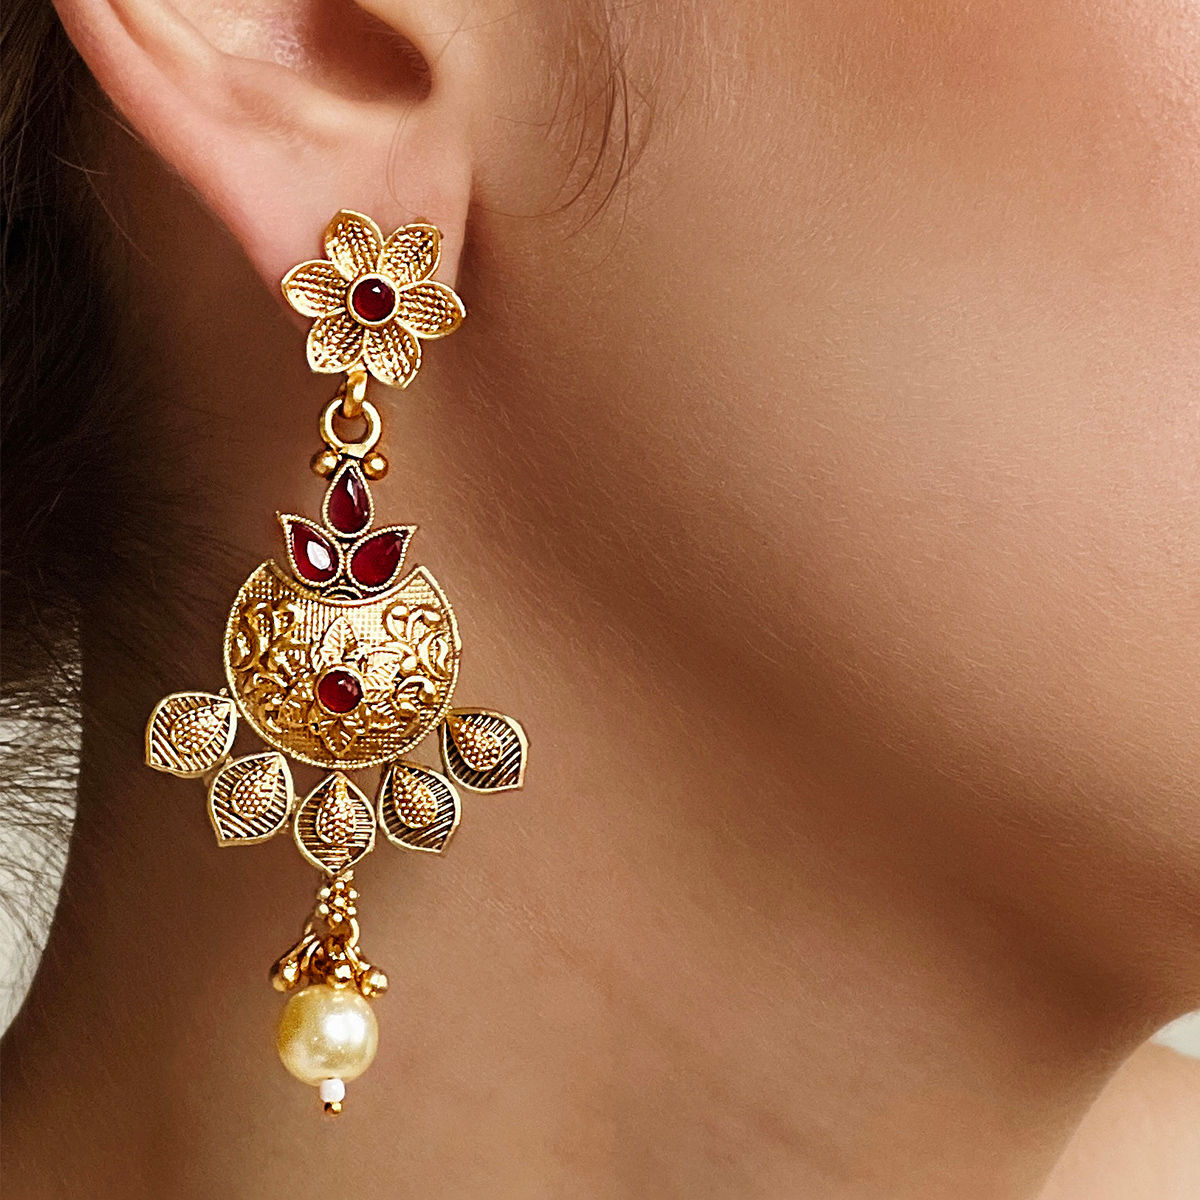 Azai by Nykaa Fashion Gold Plated Temple Jewellery Jhumkis with Ear Cuff  Buy Azai by Nykaa Fashion Gold Plated Temple Jewellery Jhumkis with Ear  Cuff Online at Best Price in India 